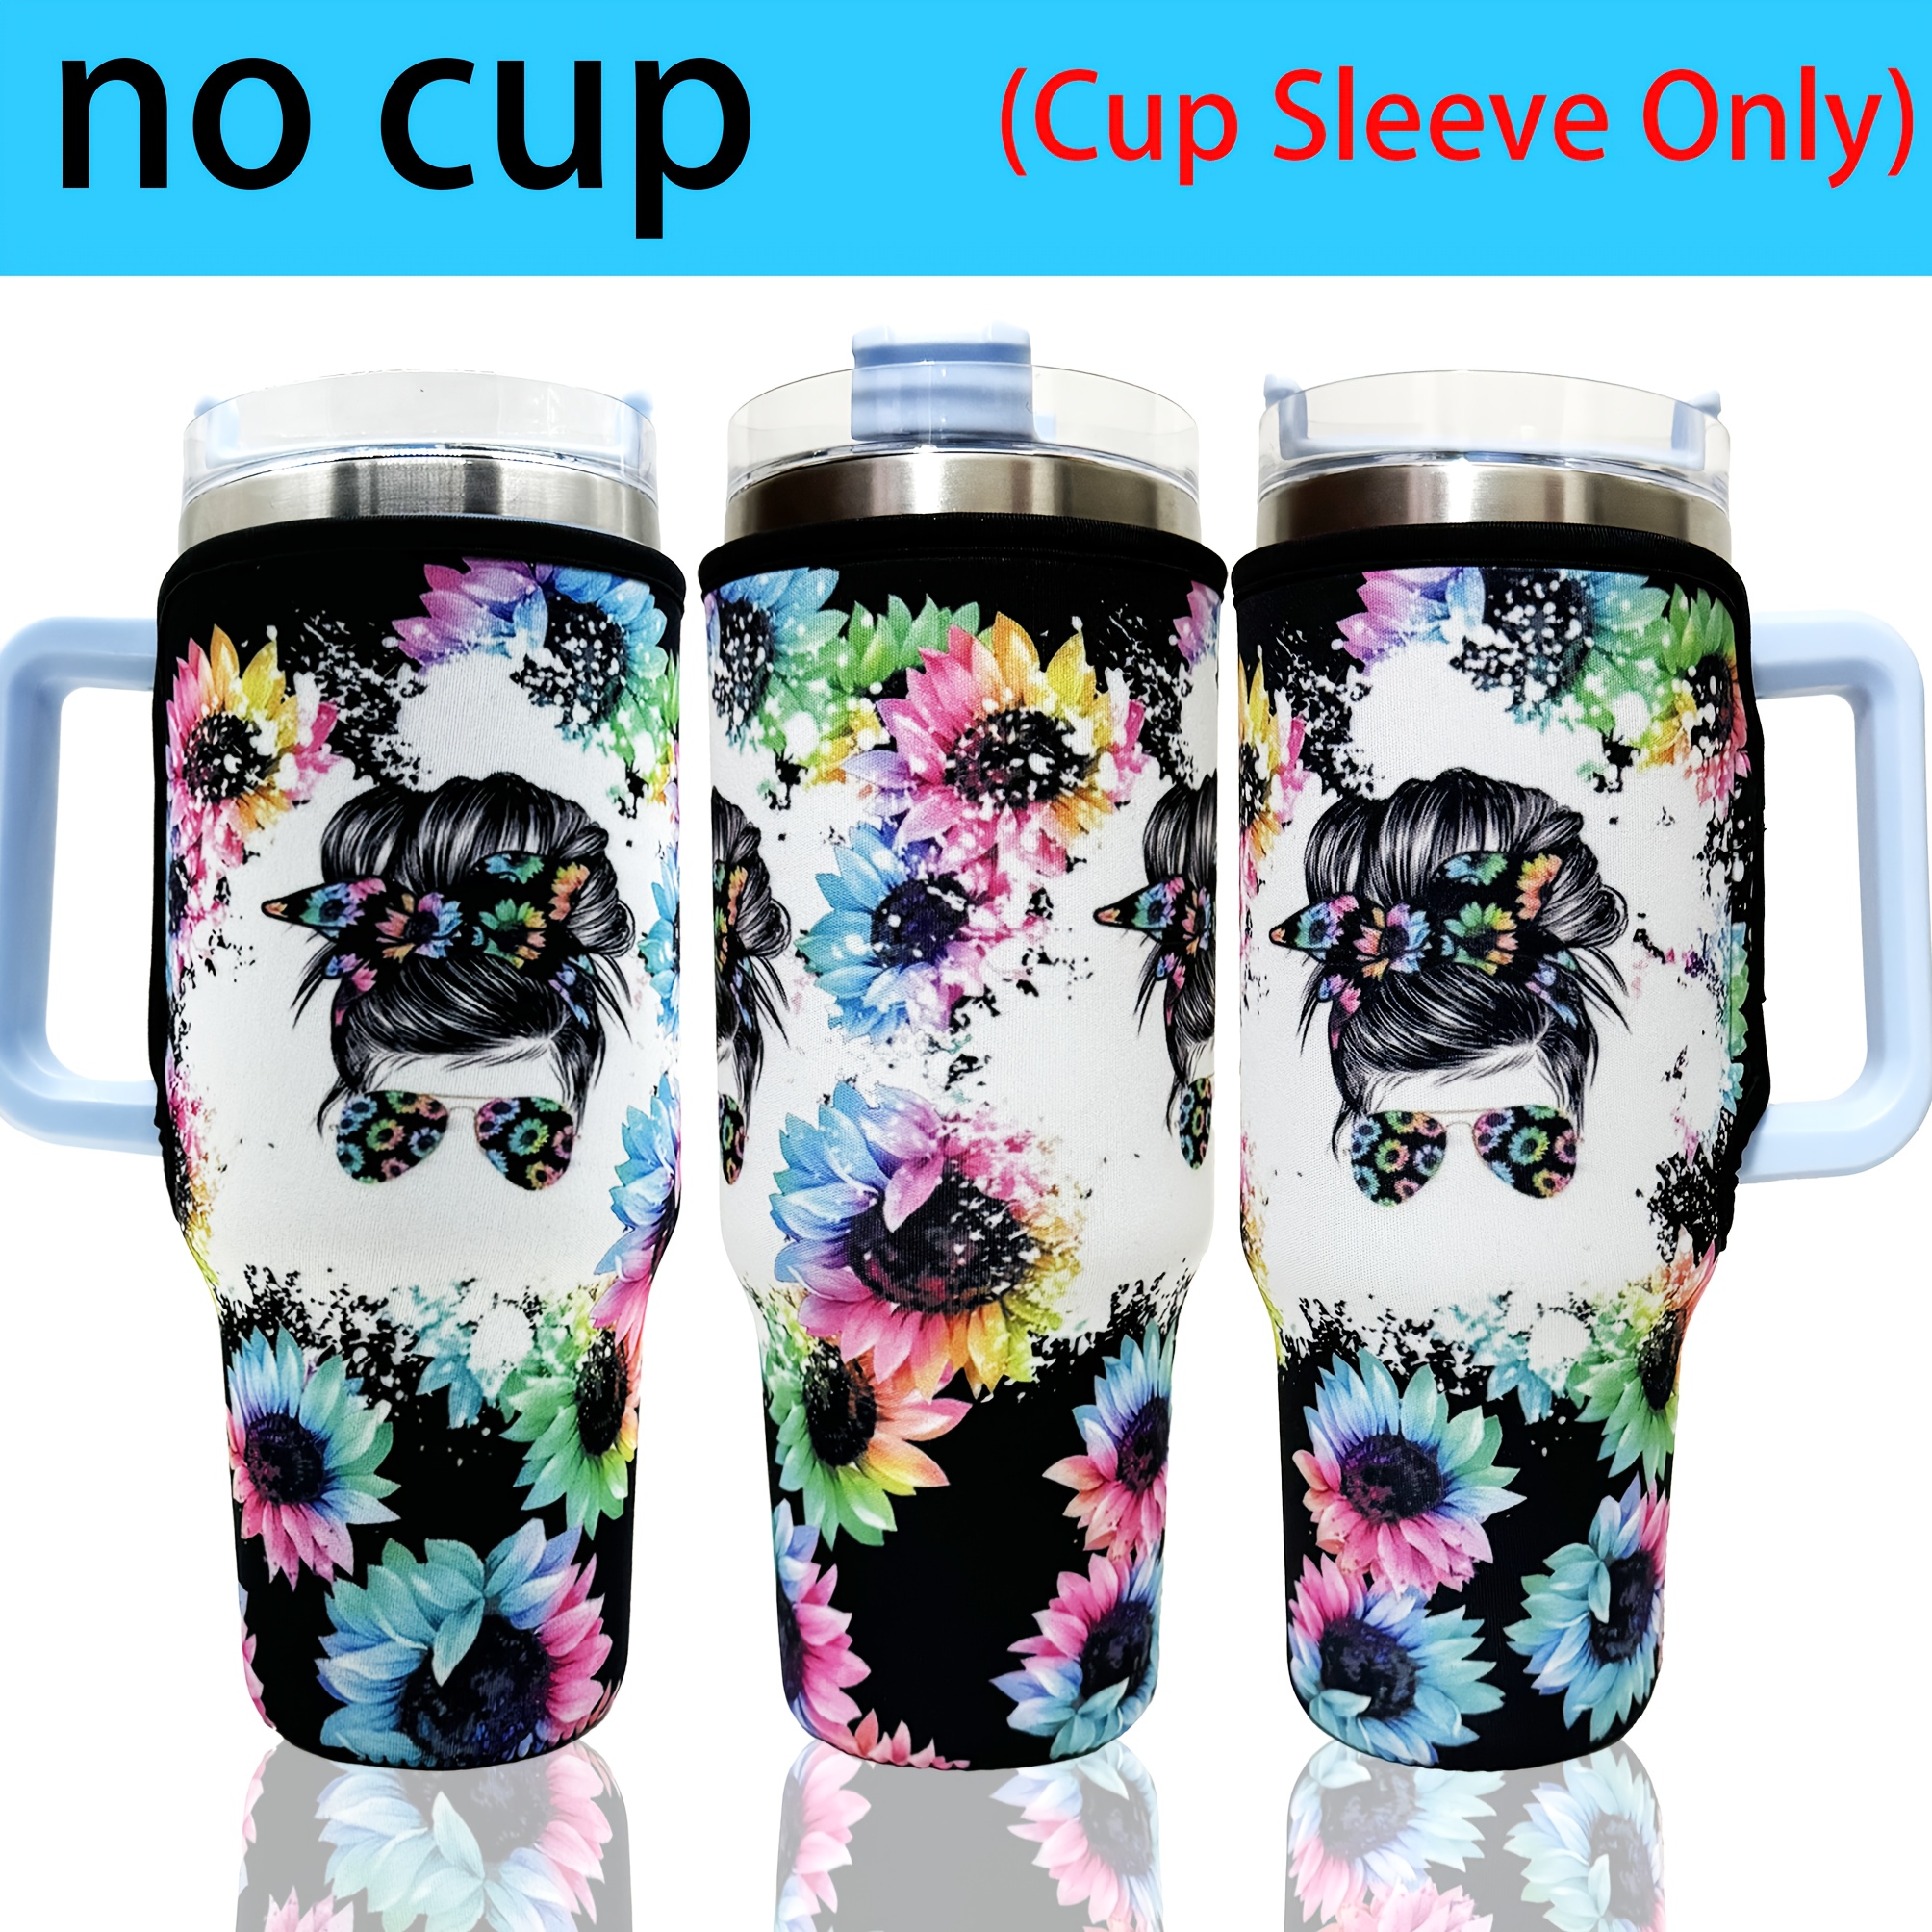 

1pc Non-slip Neoprene Cup Sleeve, Colorful Insulated Cup Sleeve, Suitable For 40oz Tumbler With Handle (cup Sleeve Only)